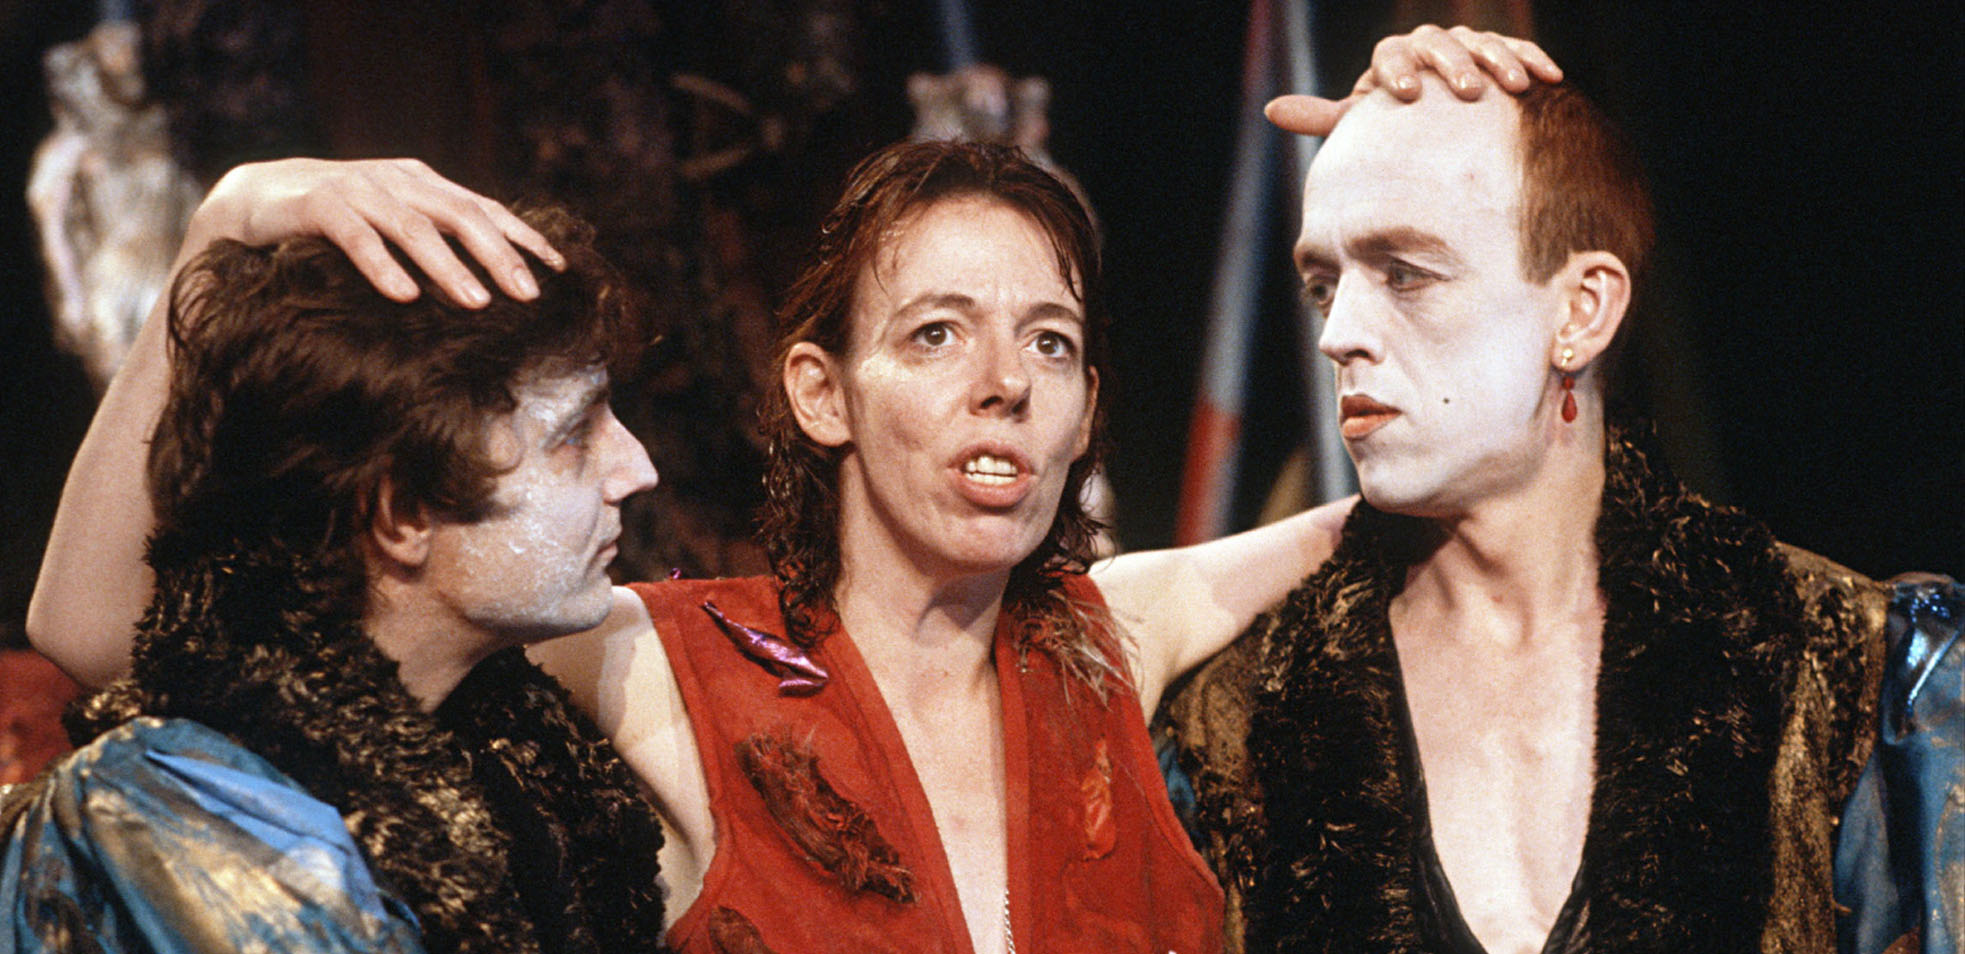 Hamlet (1987), photo by Donald Cooper, www.photostage.co.uk